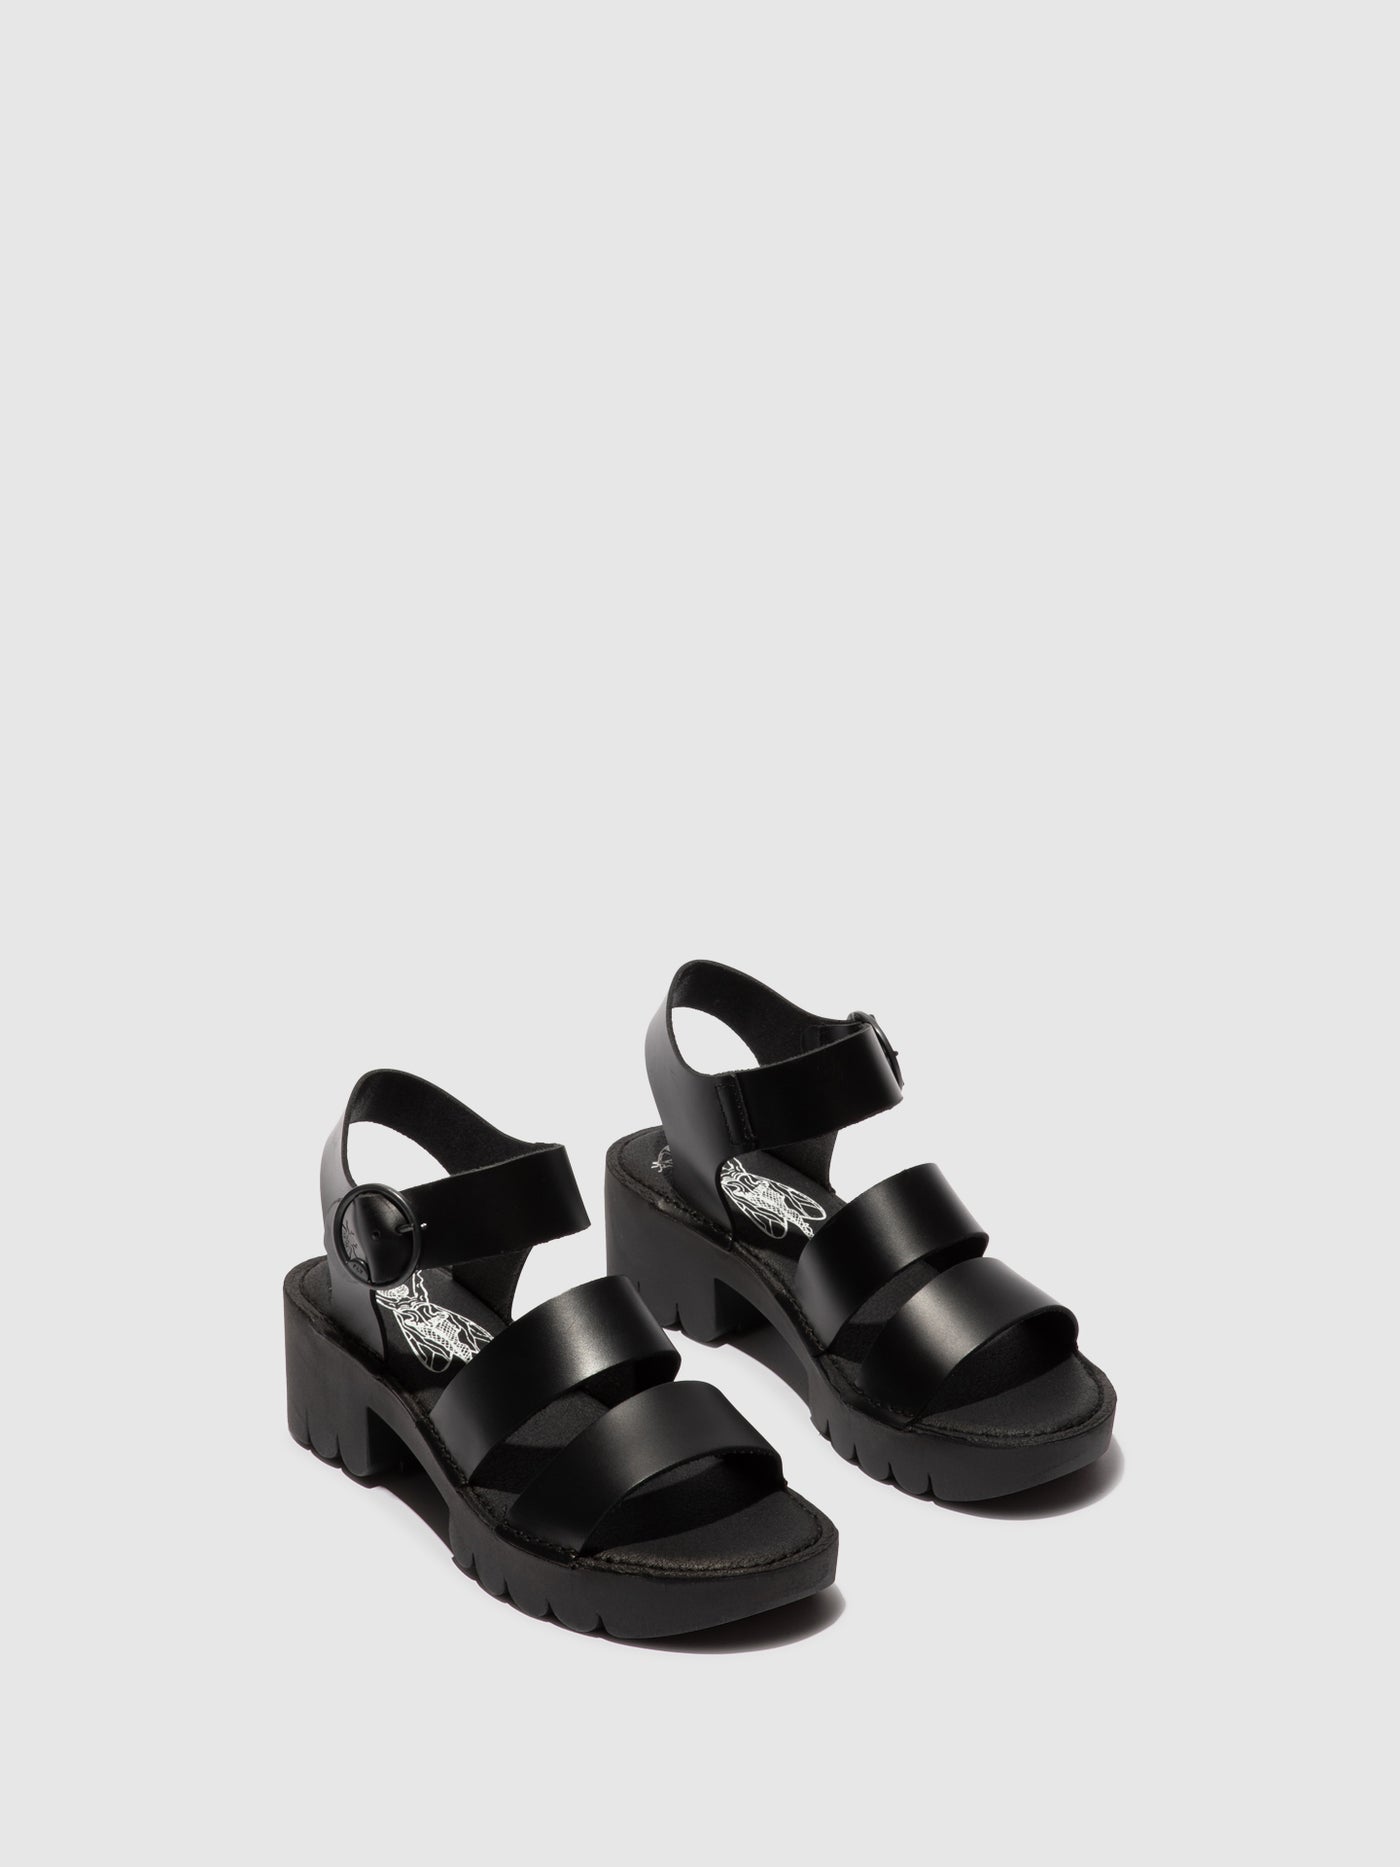 Buckle Sandals EGLY520FLY BLACK